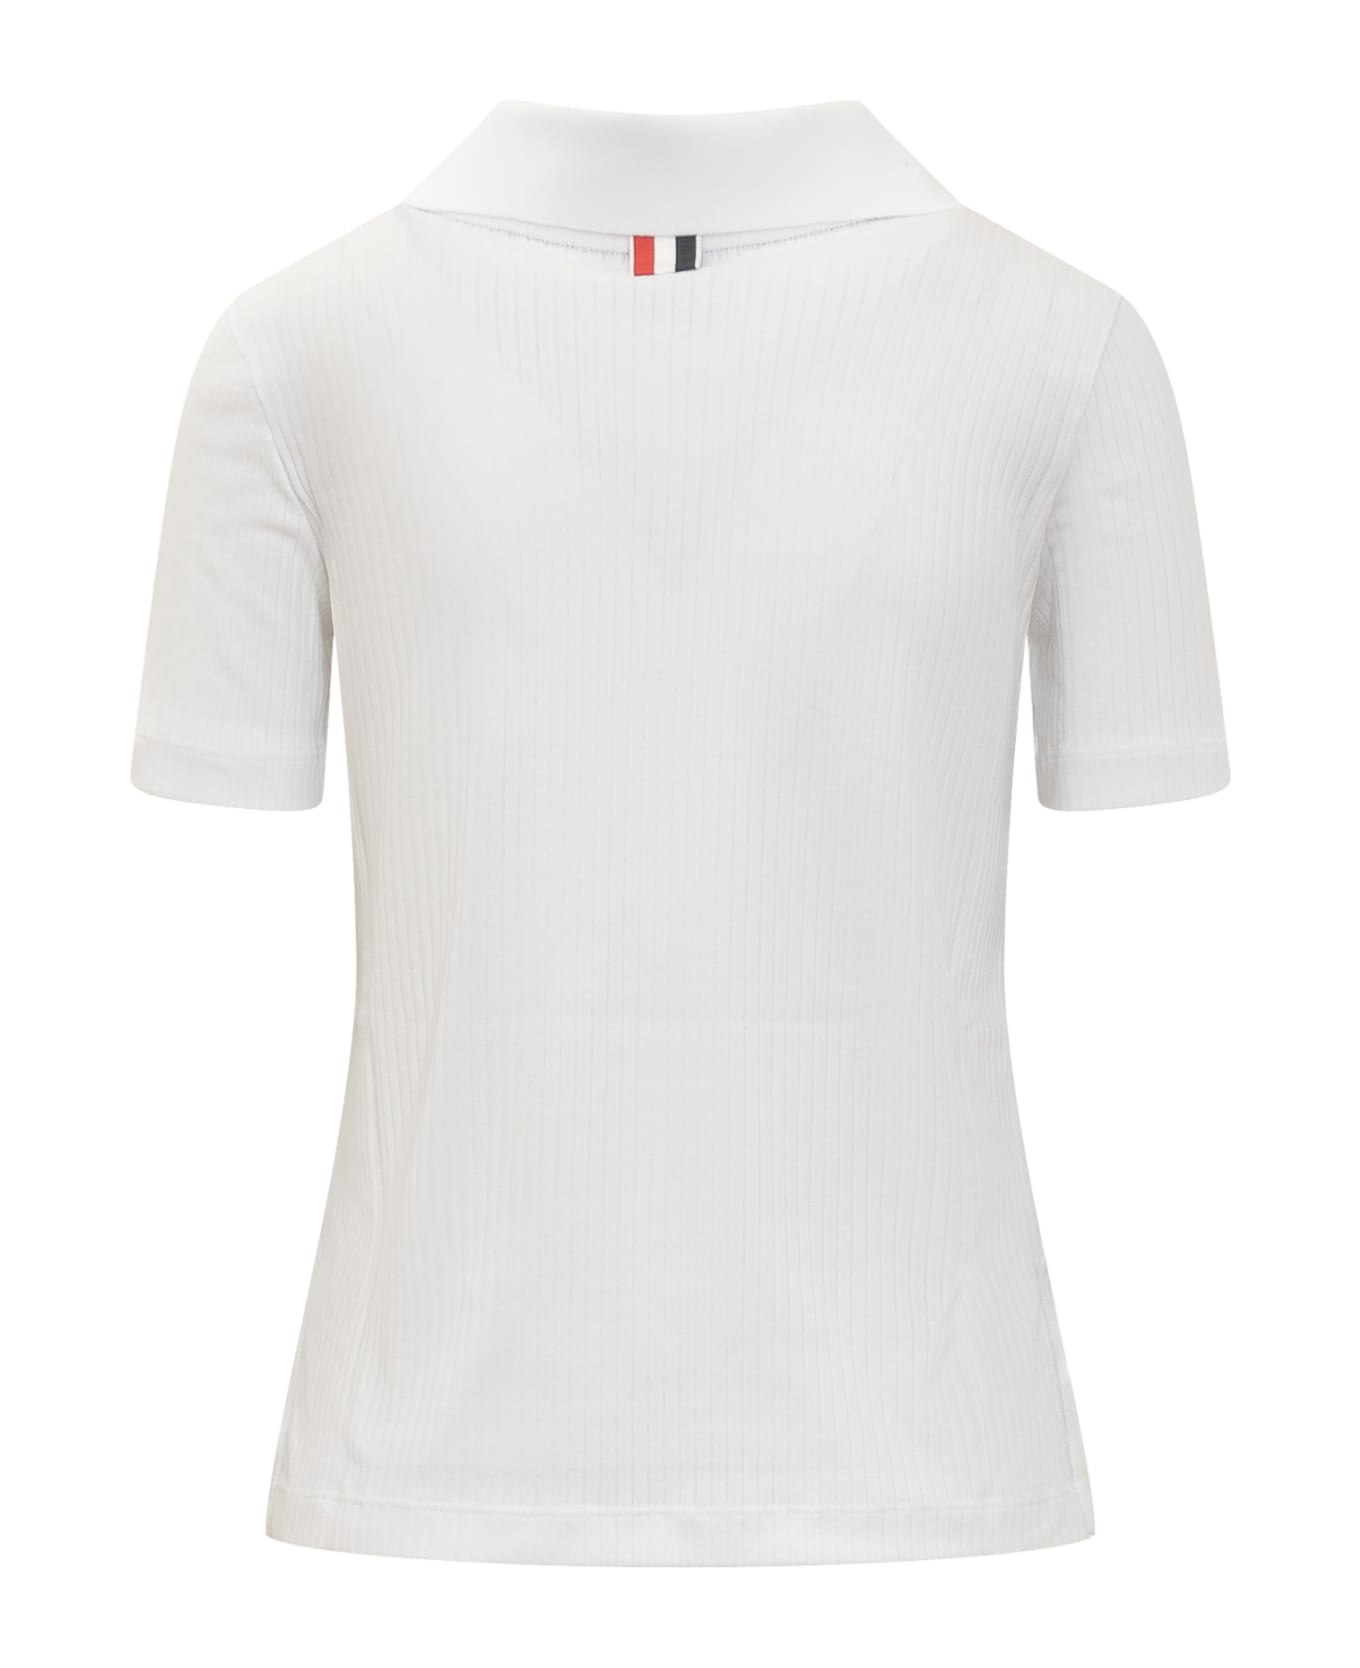 Thom Browne S/s Polo With Web Stripes - White ポロシャツ